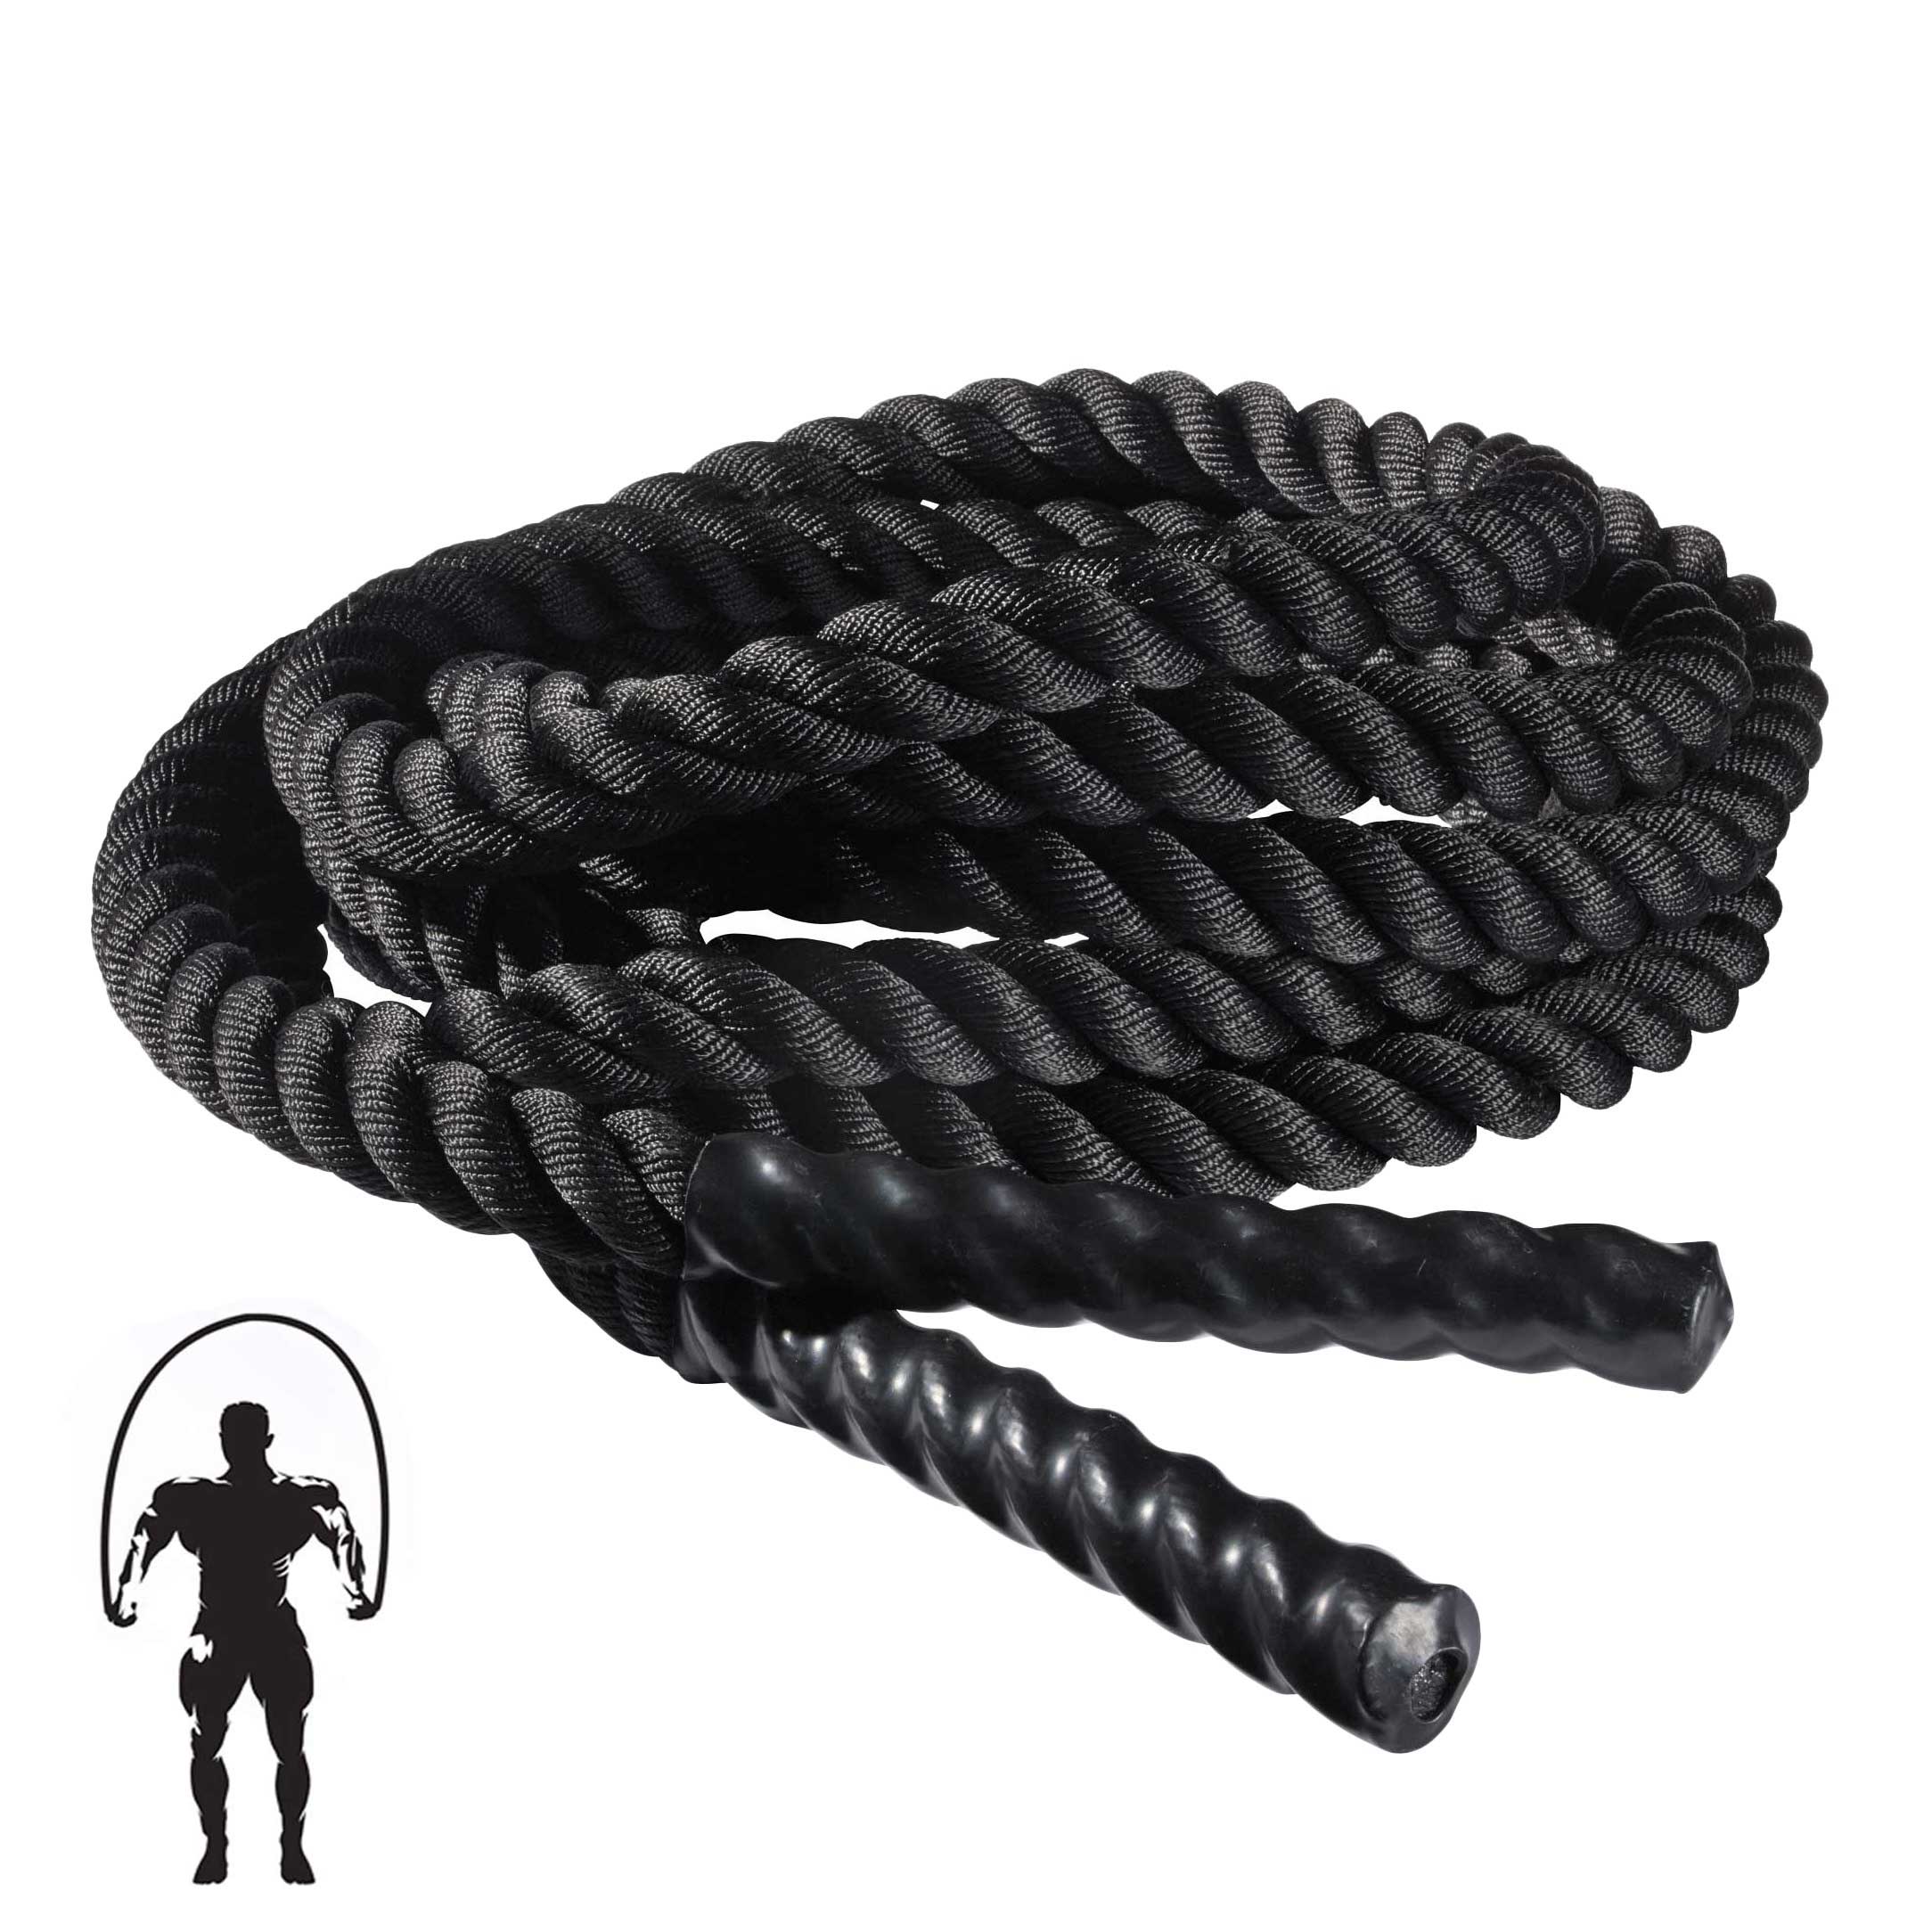 Adult Exercise Battle Ropes Men Women Heavy Skipping Jump Rope for Fitness 3LB Weighted Jump Ropes